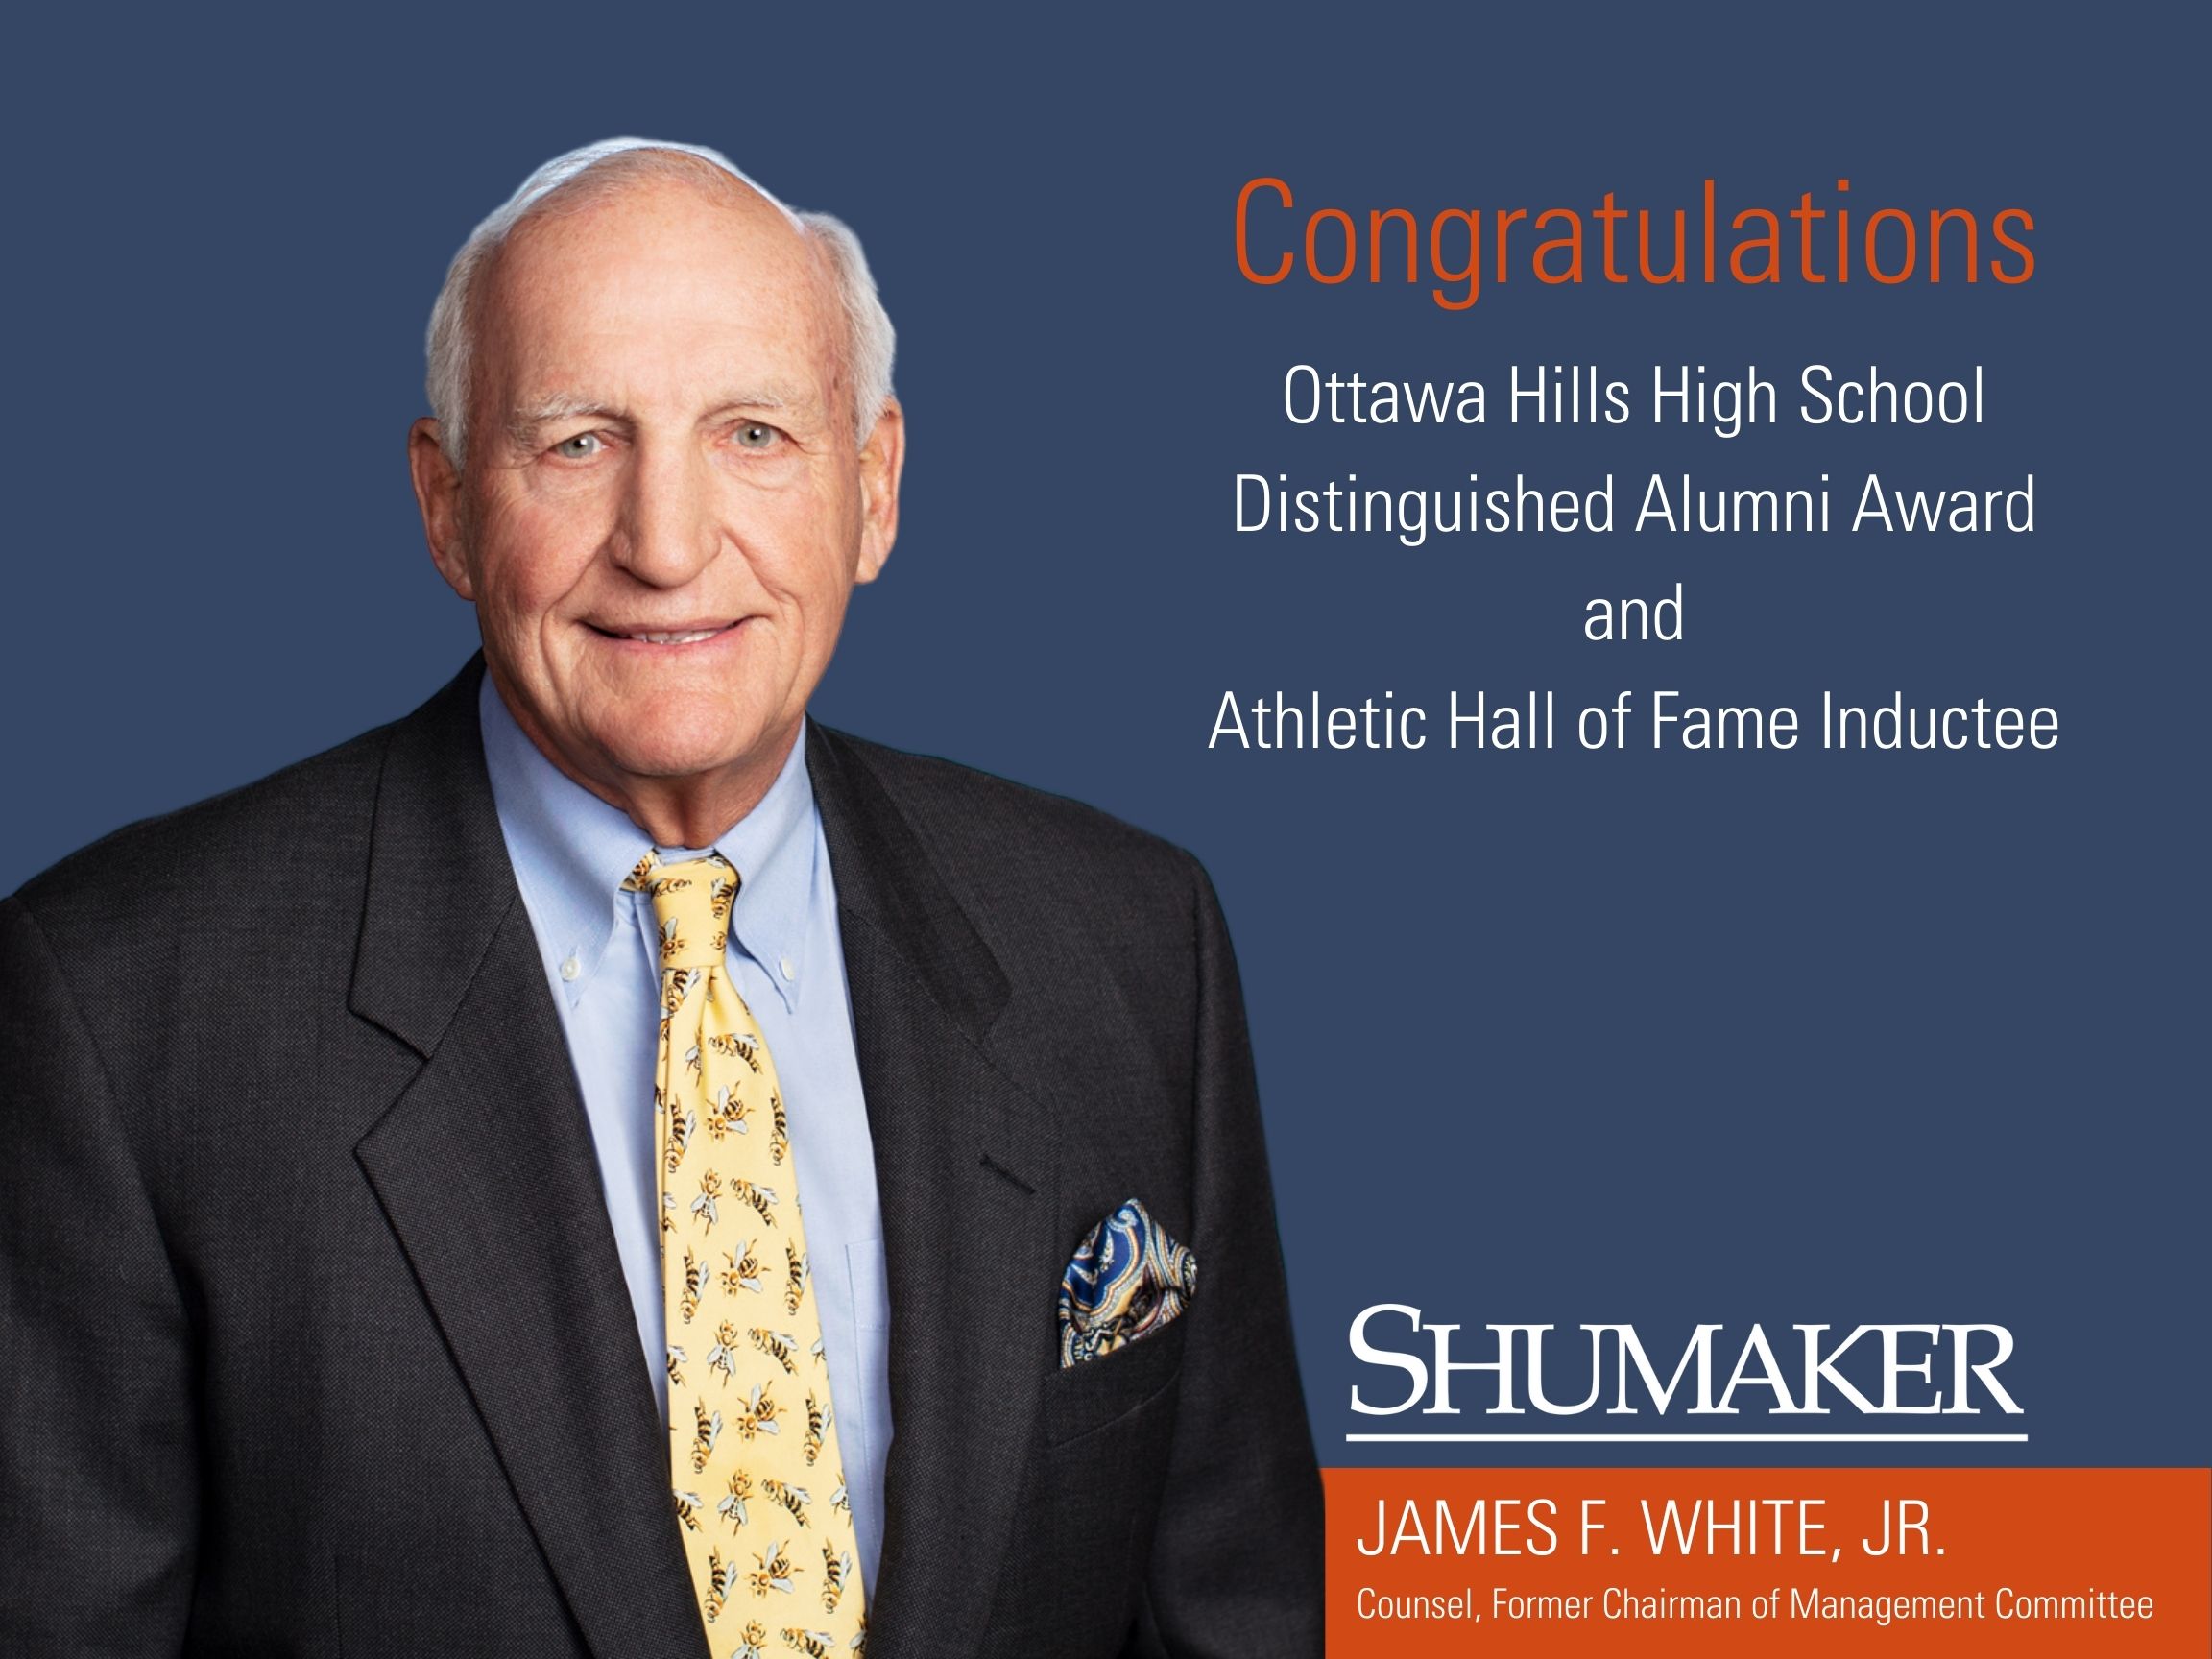 Shumaker Lawyer James F. White, Jr. Honored as Athlete and Business and Civic Leader